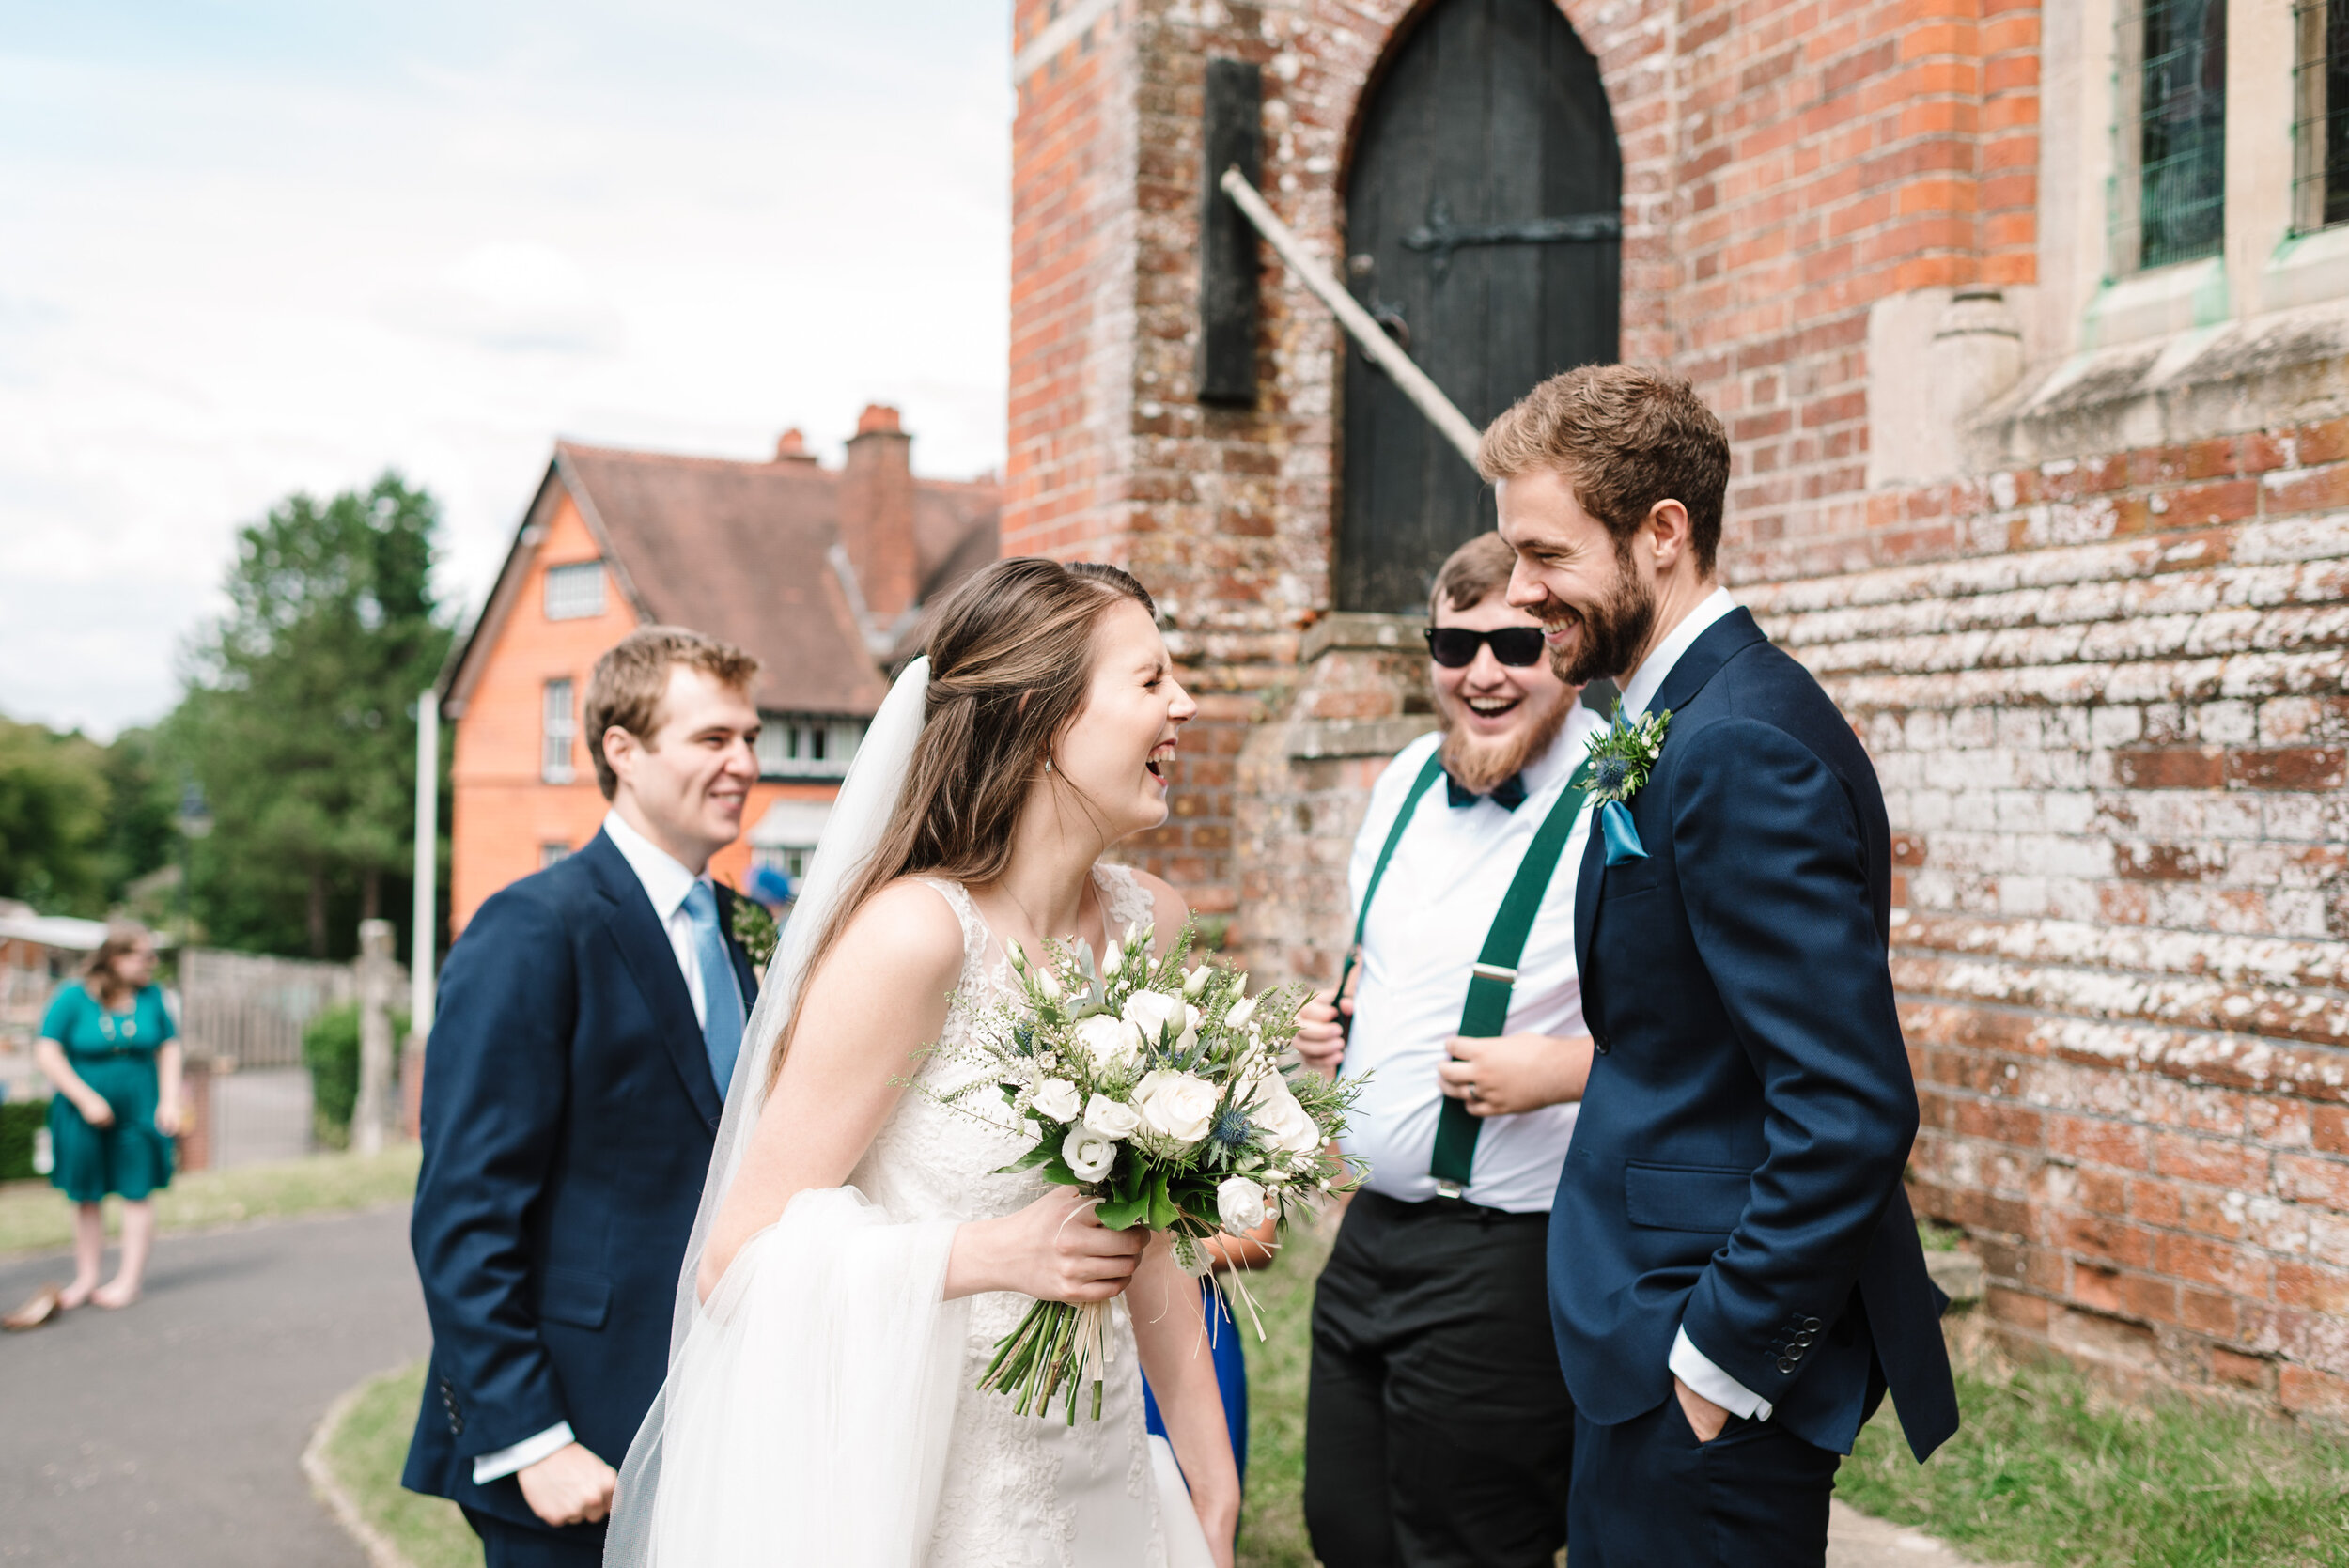 Bride laughing with a groomsman outside church